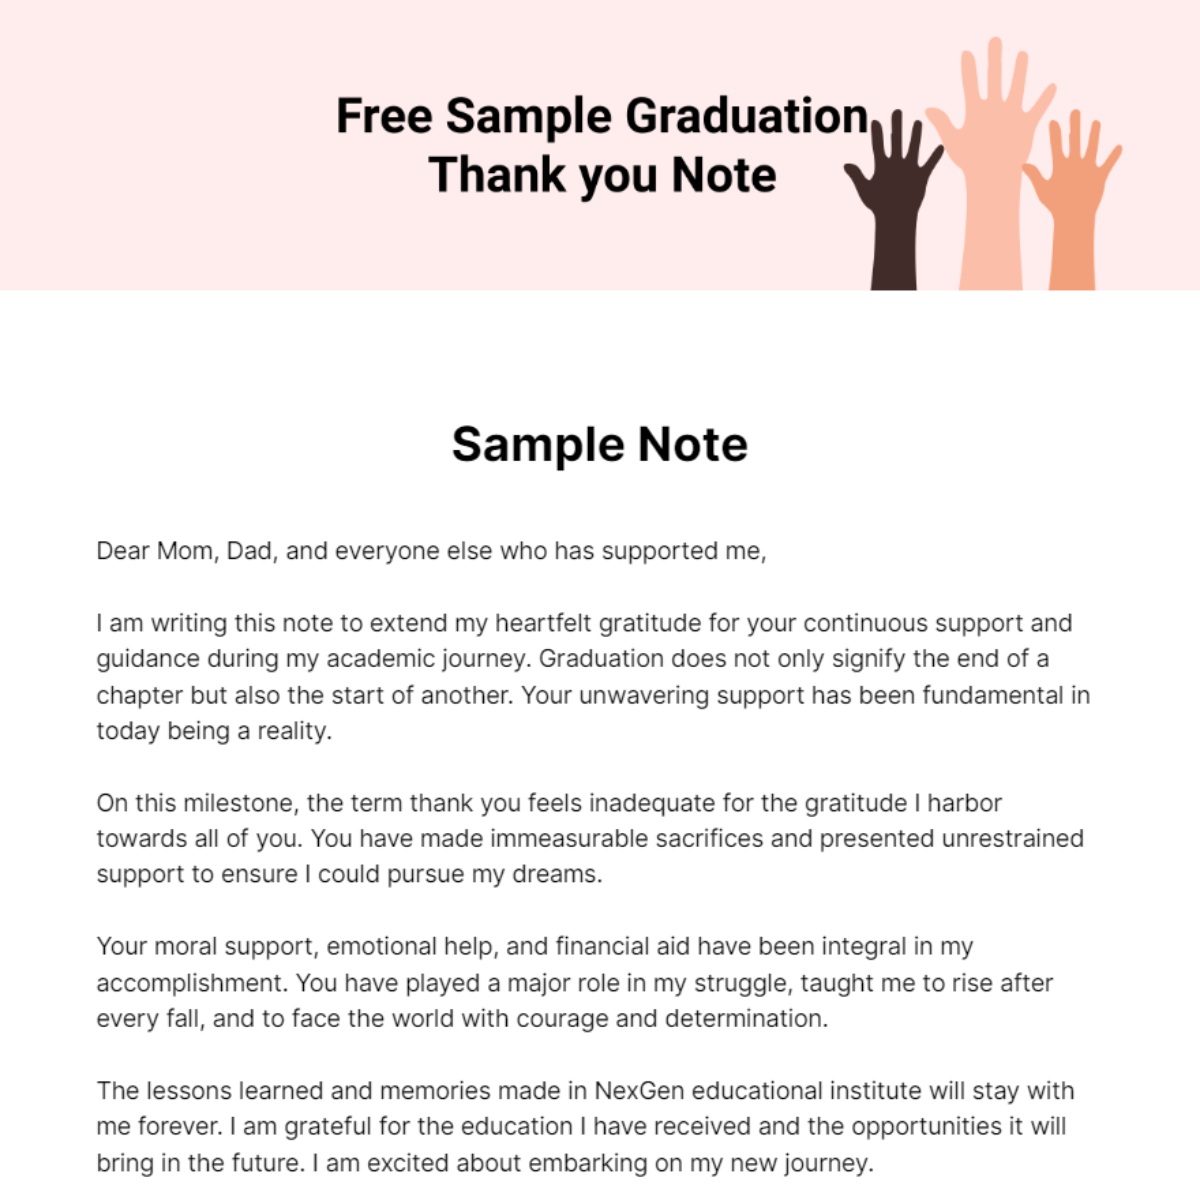 Free Sample Graduation Thank you Note Template